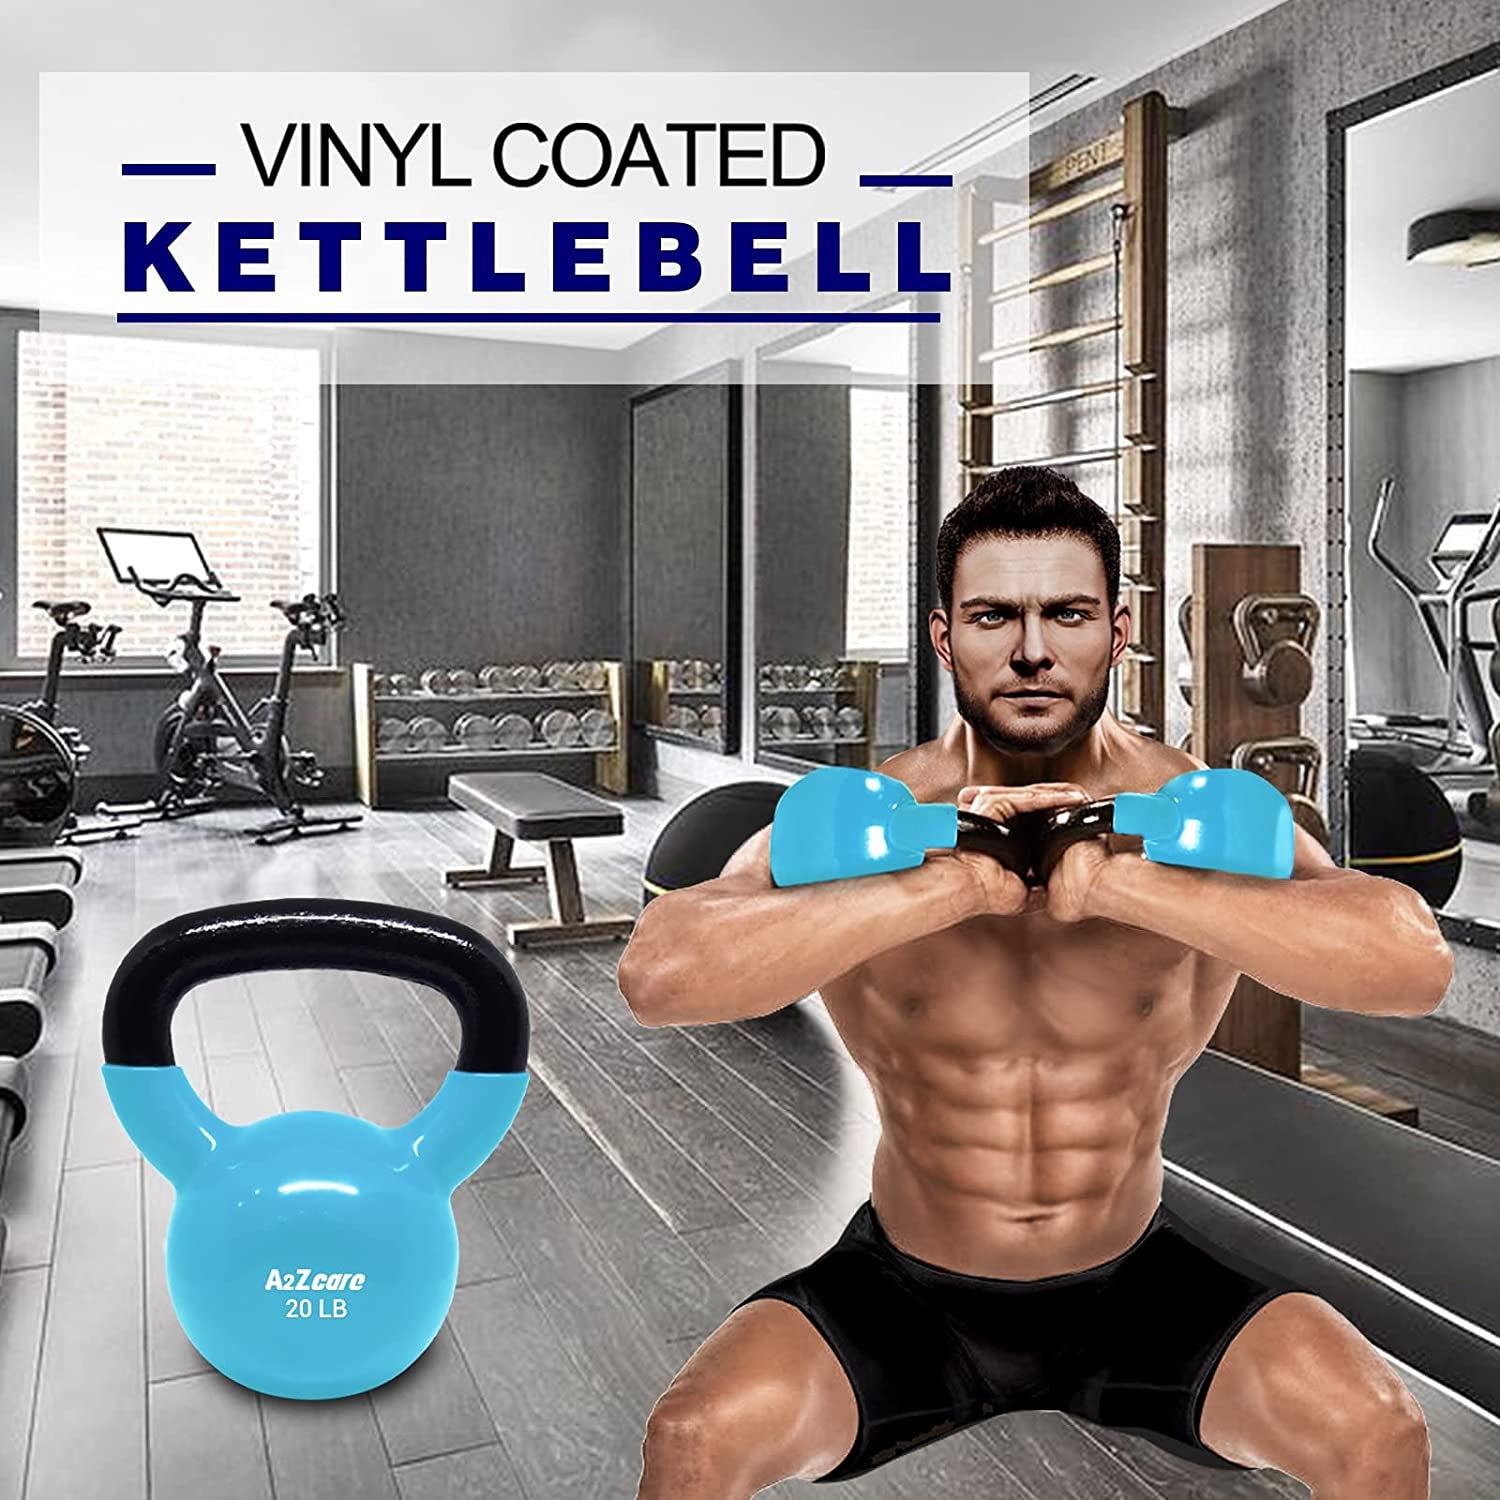 Vinyl Coated Kettlebells for Cross Training, Swings, Body Workout and Muscle Exercise - Single